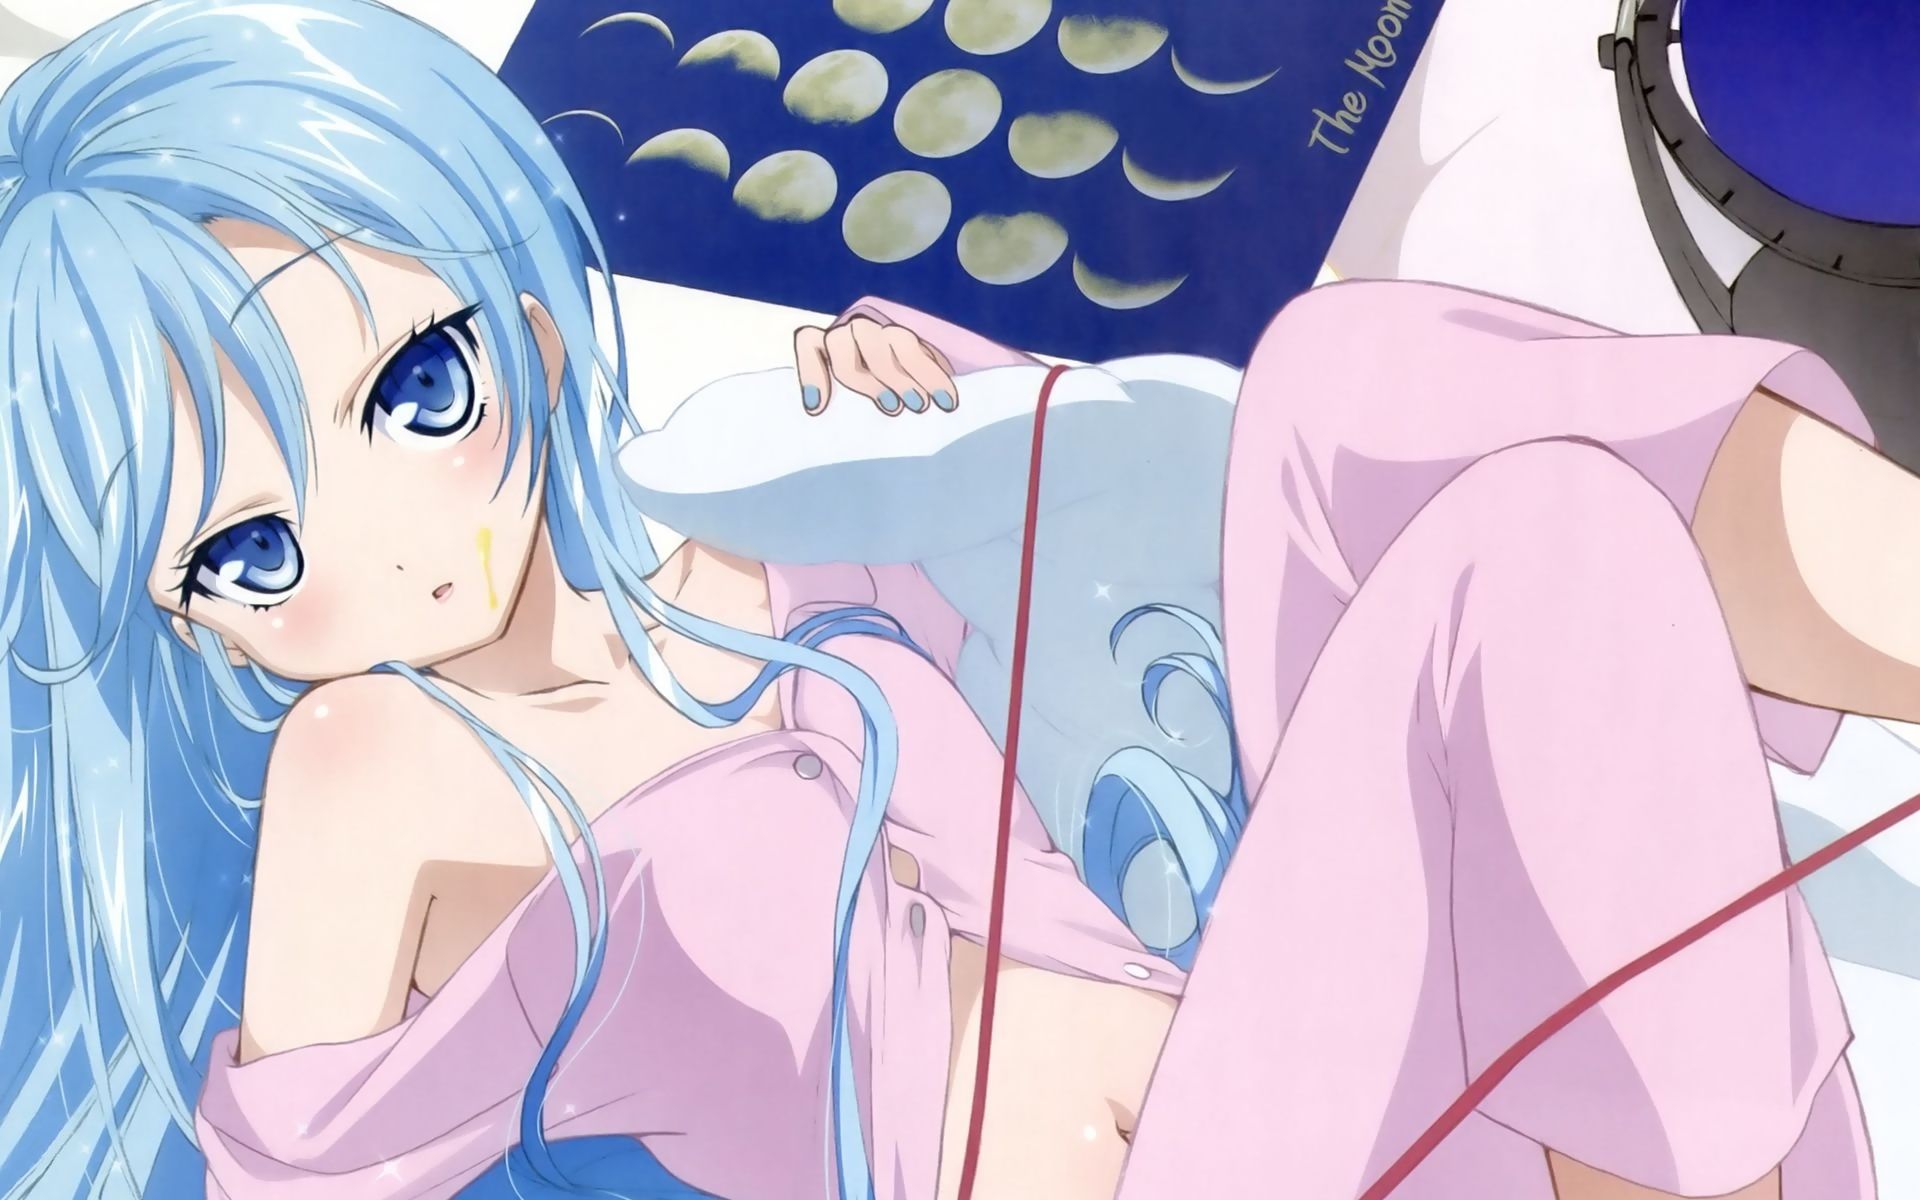 [2nd] Secondary erotic image of a girl with blue or light blue hair Part 7 [Blue hair] 16